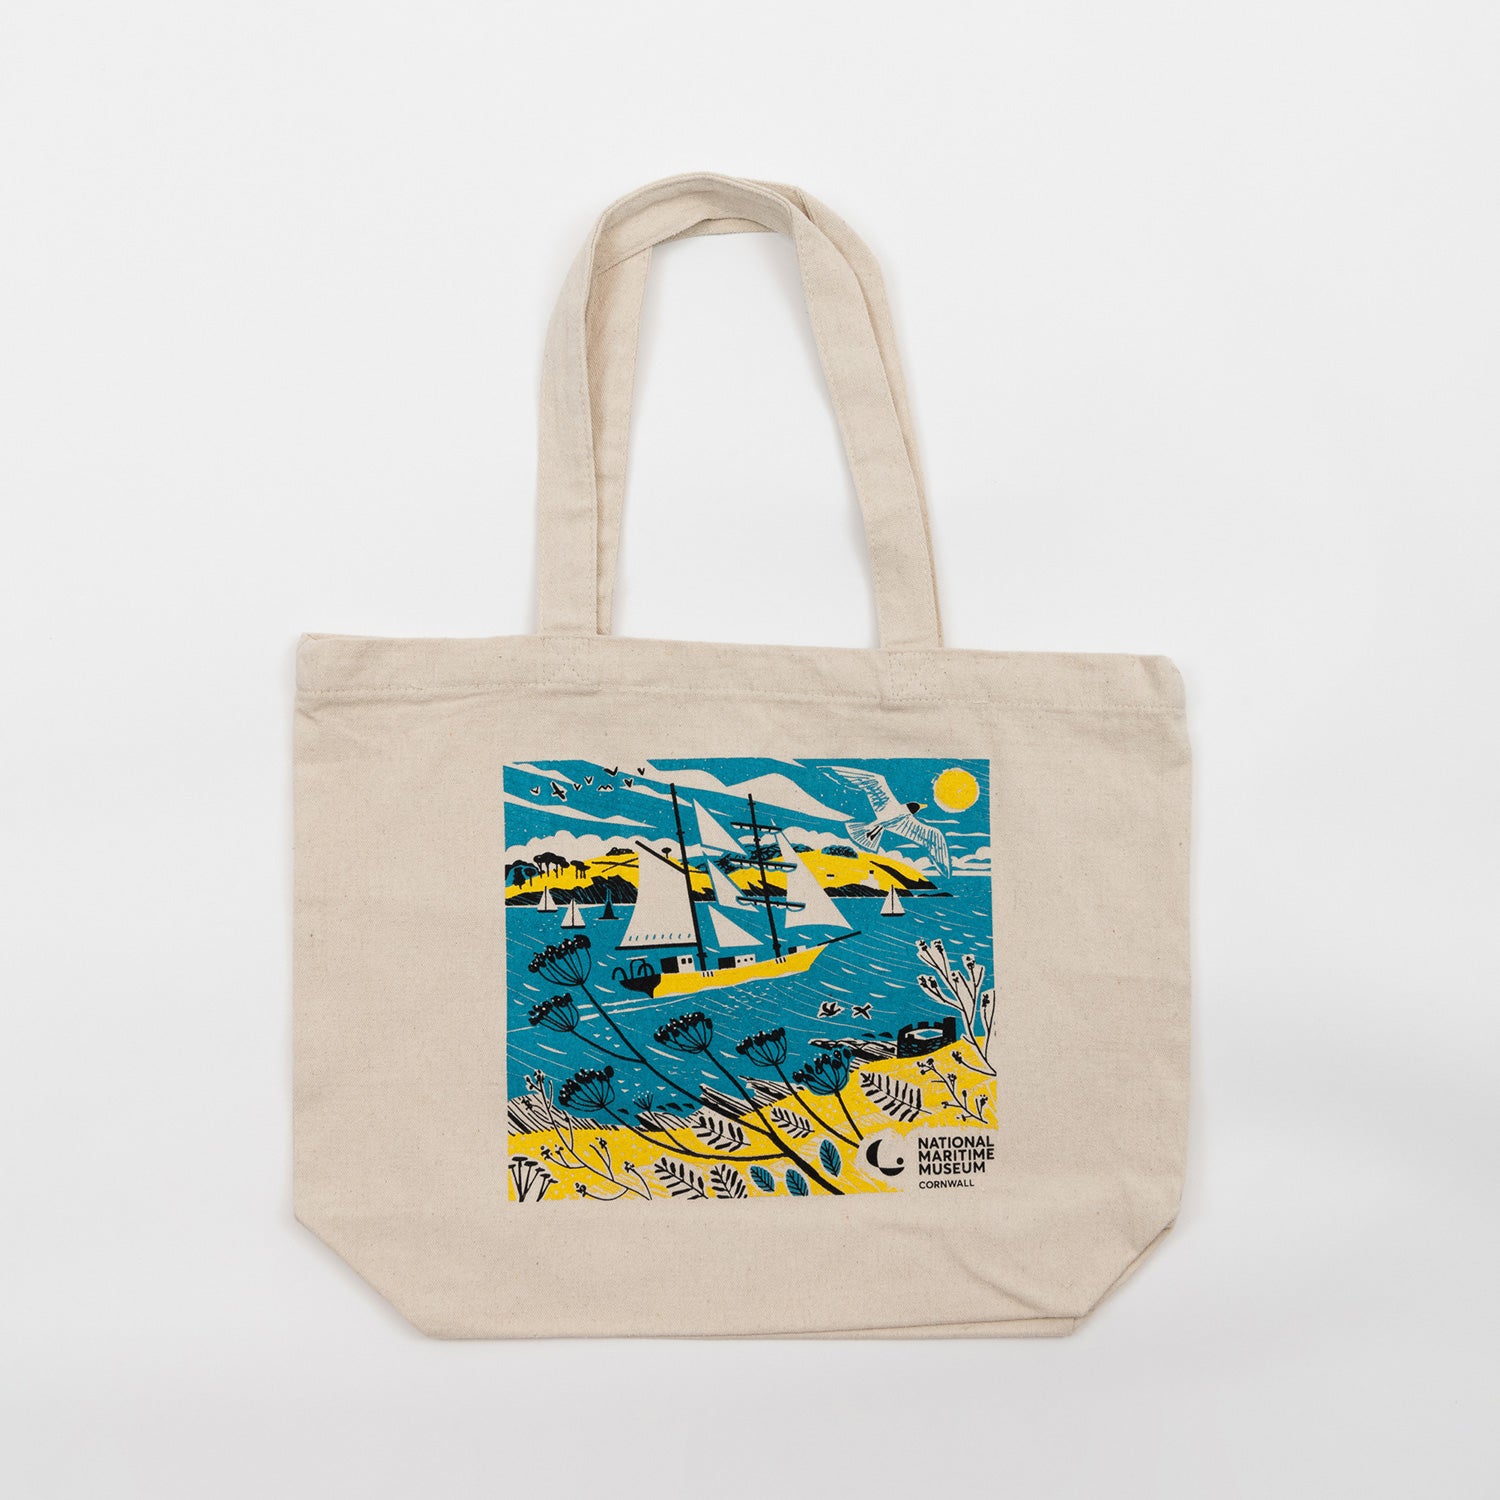 An off-white coloured tote bag featuring a blue and yellow Falmouth Tall Ships illustration on the front. Pictured on a white background.